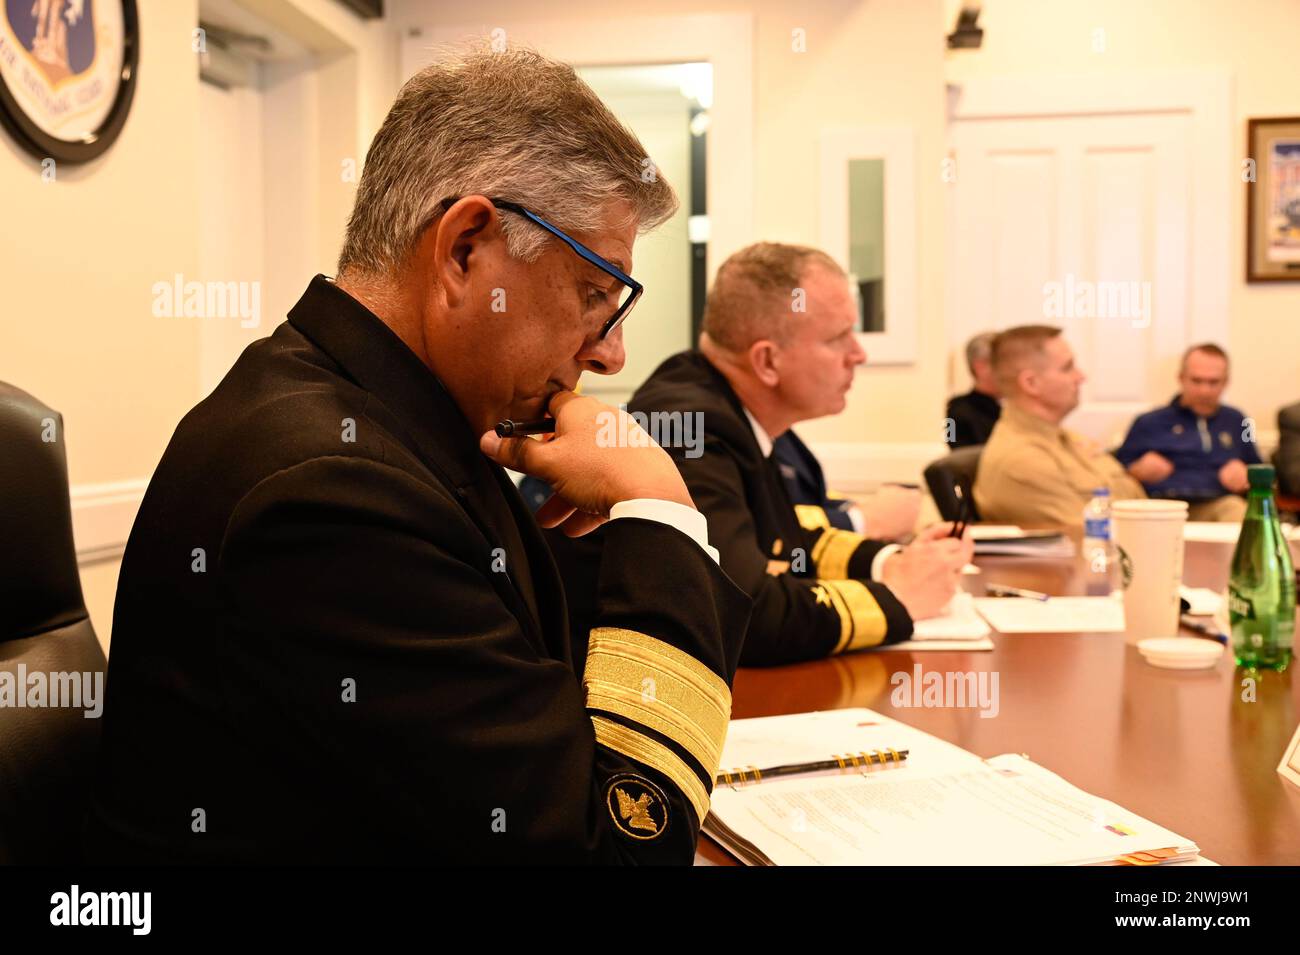 230207-N-OC941-0159  SAINT AUGUSTINE, Fla. - (Feb. 7, 2023) - Ecuadorian Navy Rear Adm. Jaime Patricio Vela Erazo, Chief of Staff of the Ecuadorian Navy (left), and U.S. Navy Rear Adm. James Aiken, Commander, U.S. Naval Forces Southern Command and U.S. 4th Fleet (center), engage in discussions at the U.S.-Ecuador Maritime Staff Talks hosted by U.S. Naval Forces Southern Command and U.S. Navy 4th Fleet at the Florida National Guard Headquarters in St. Augustine, Fla., Feb. 7 2023. Maritime Staff Talks support U.S. joint and combined maritime strategy by building and strengthening working relati Stock Photo